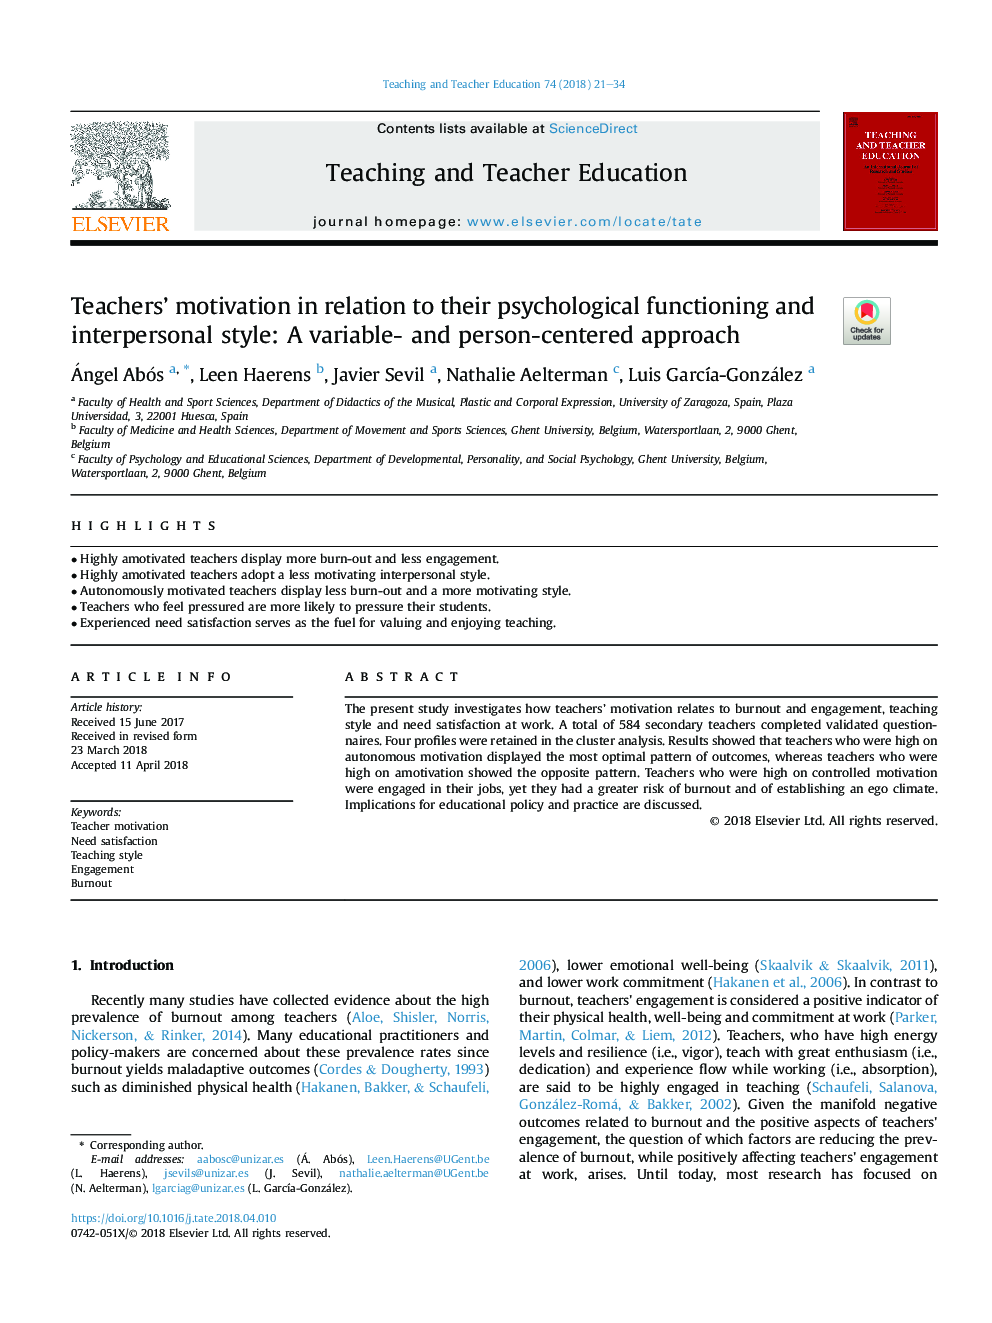 Teachers' motivation in relation to their psychological functioning and interpersonal style: A variable- and person-centered approach